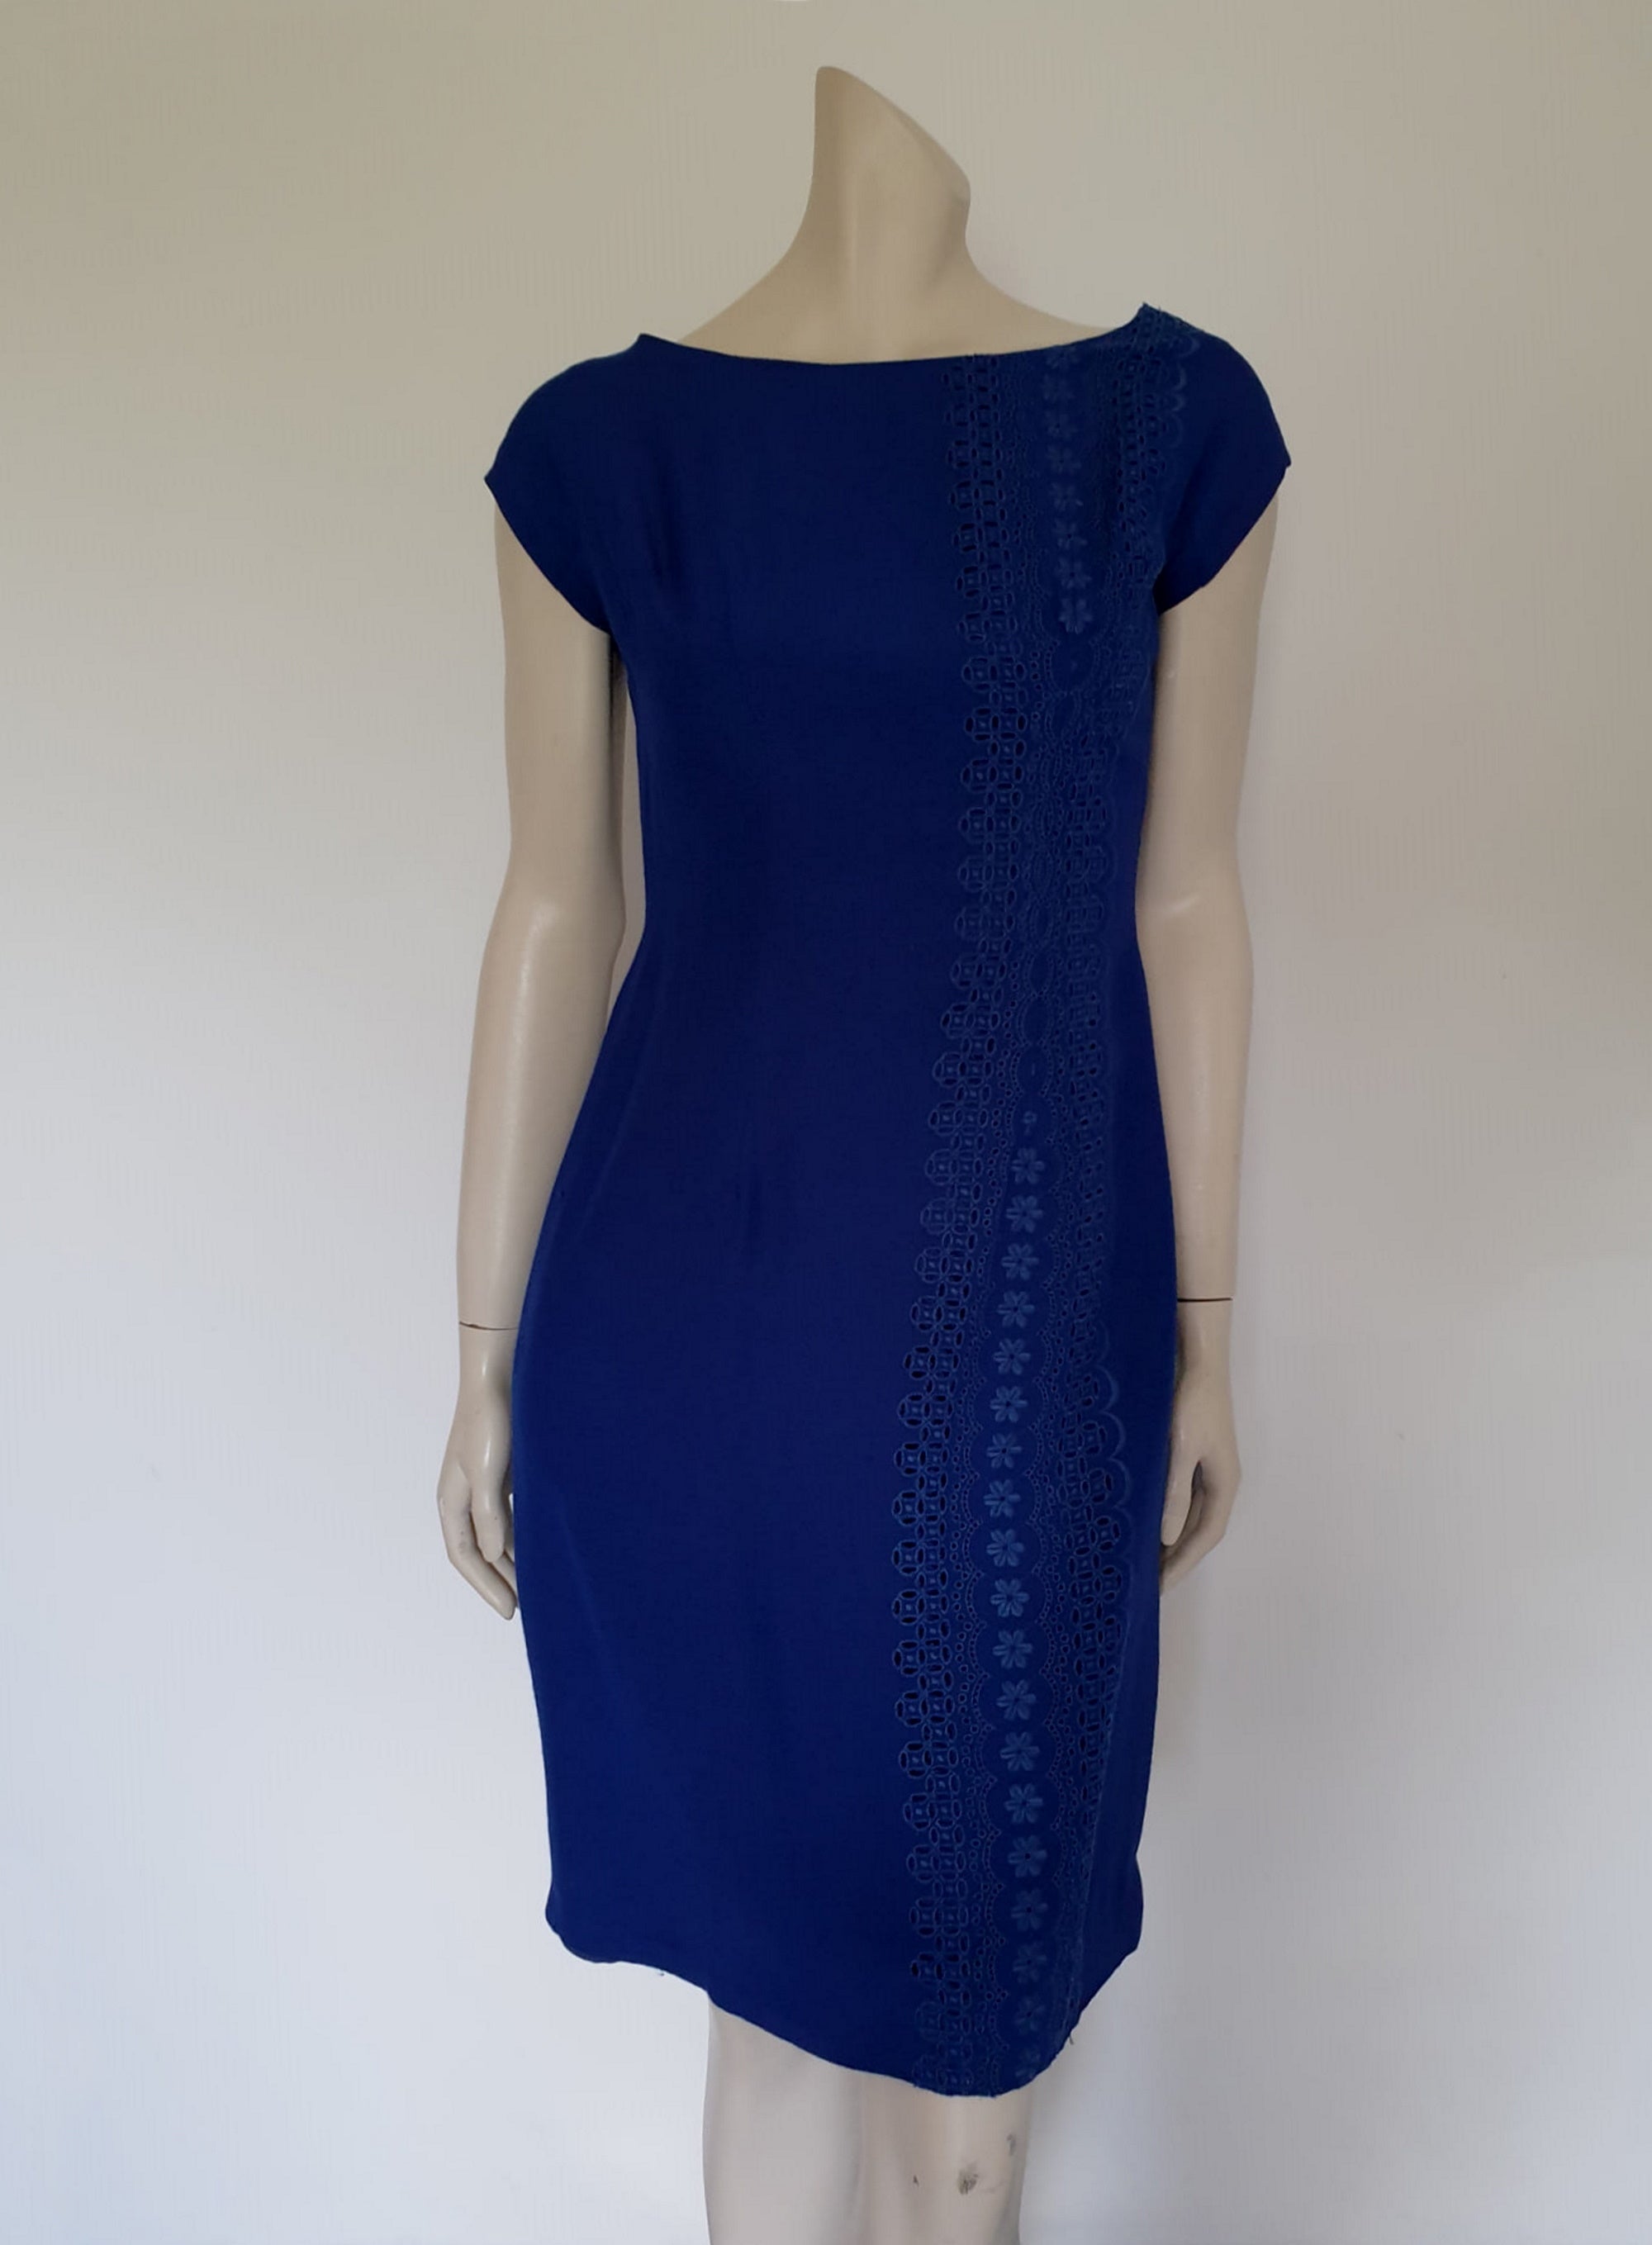 1960s vintage blue dress with eyelet embroidery by belrobe